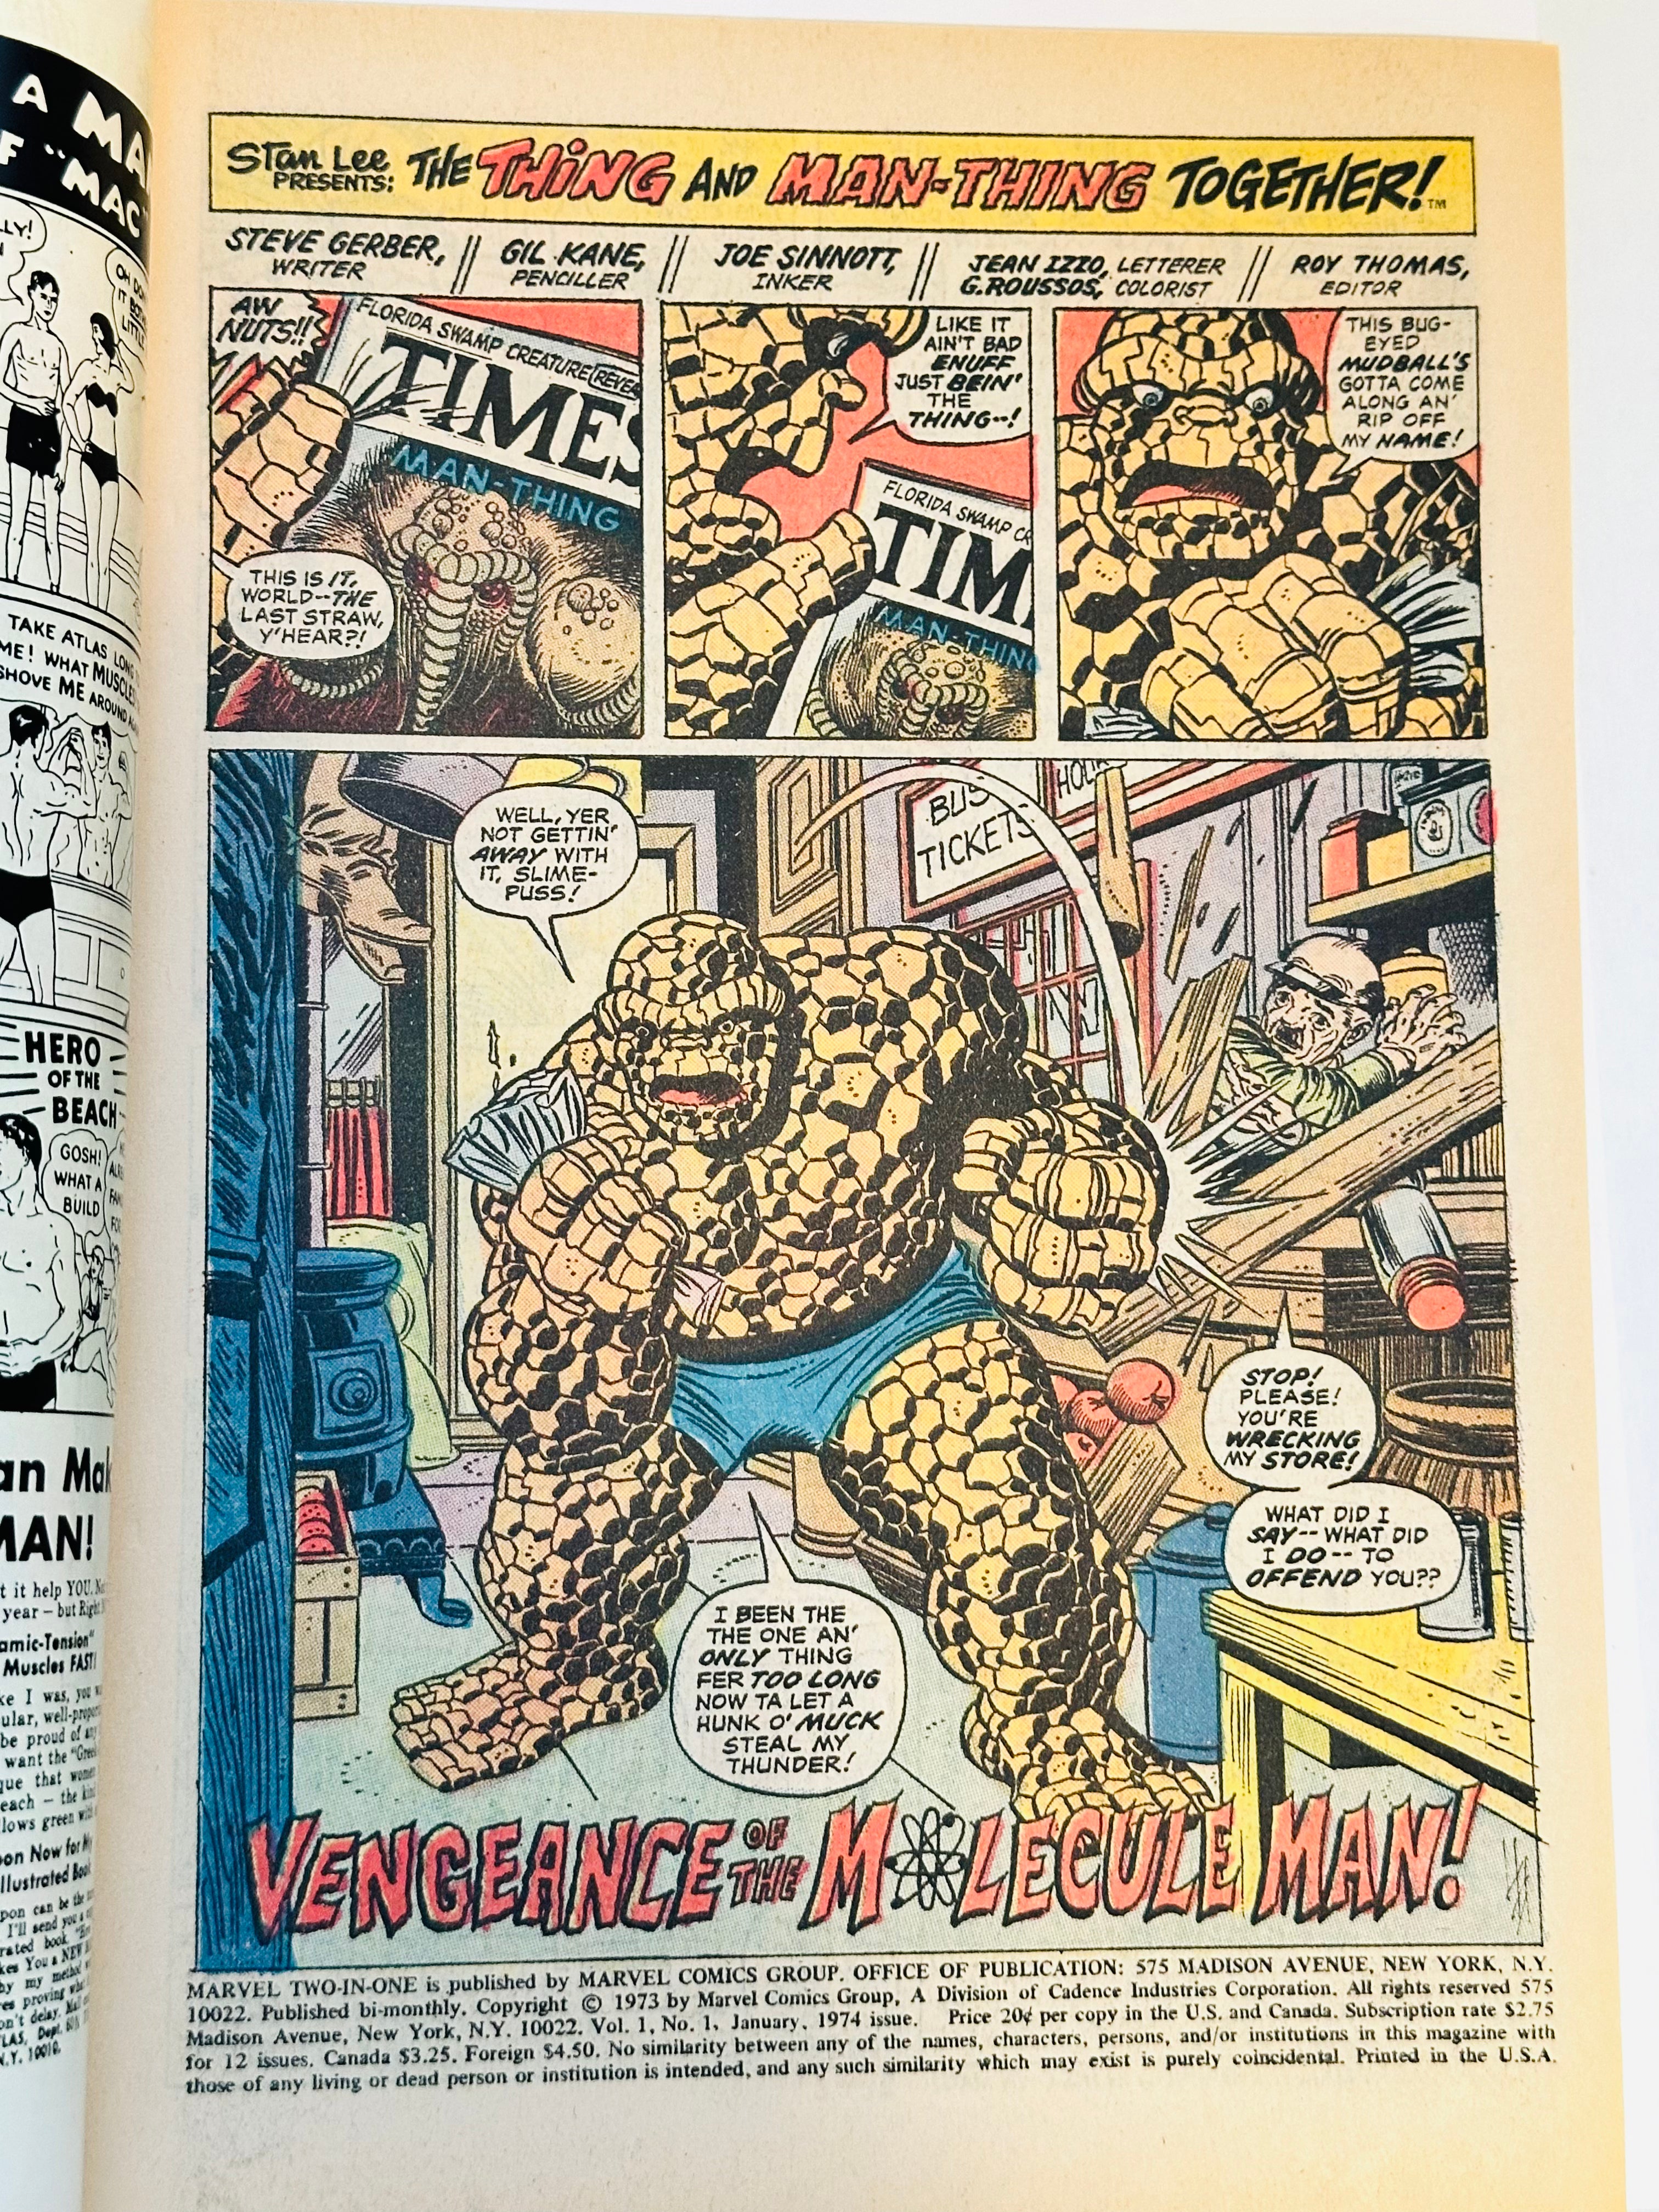 Marvel two and one1 issue, comic book 1973